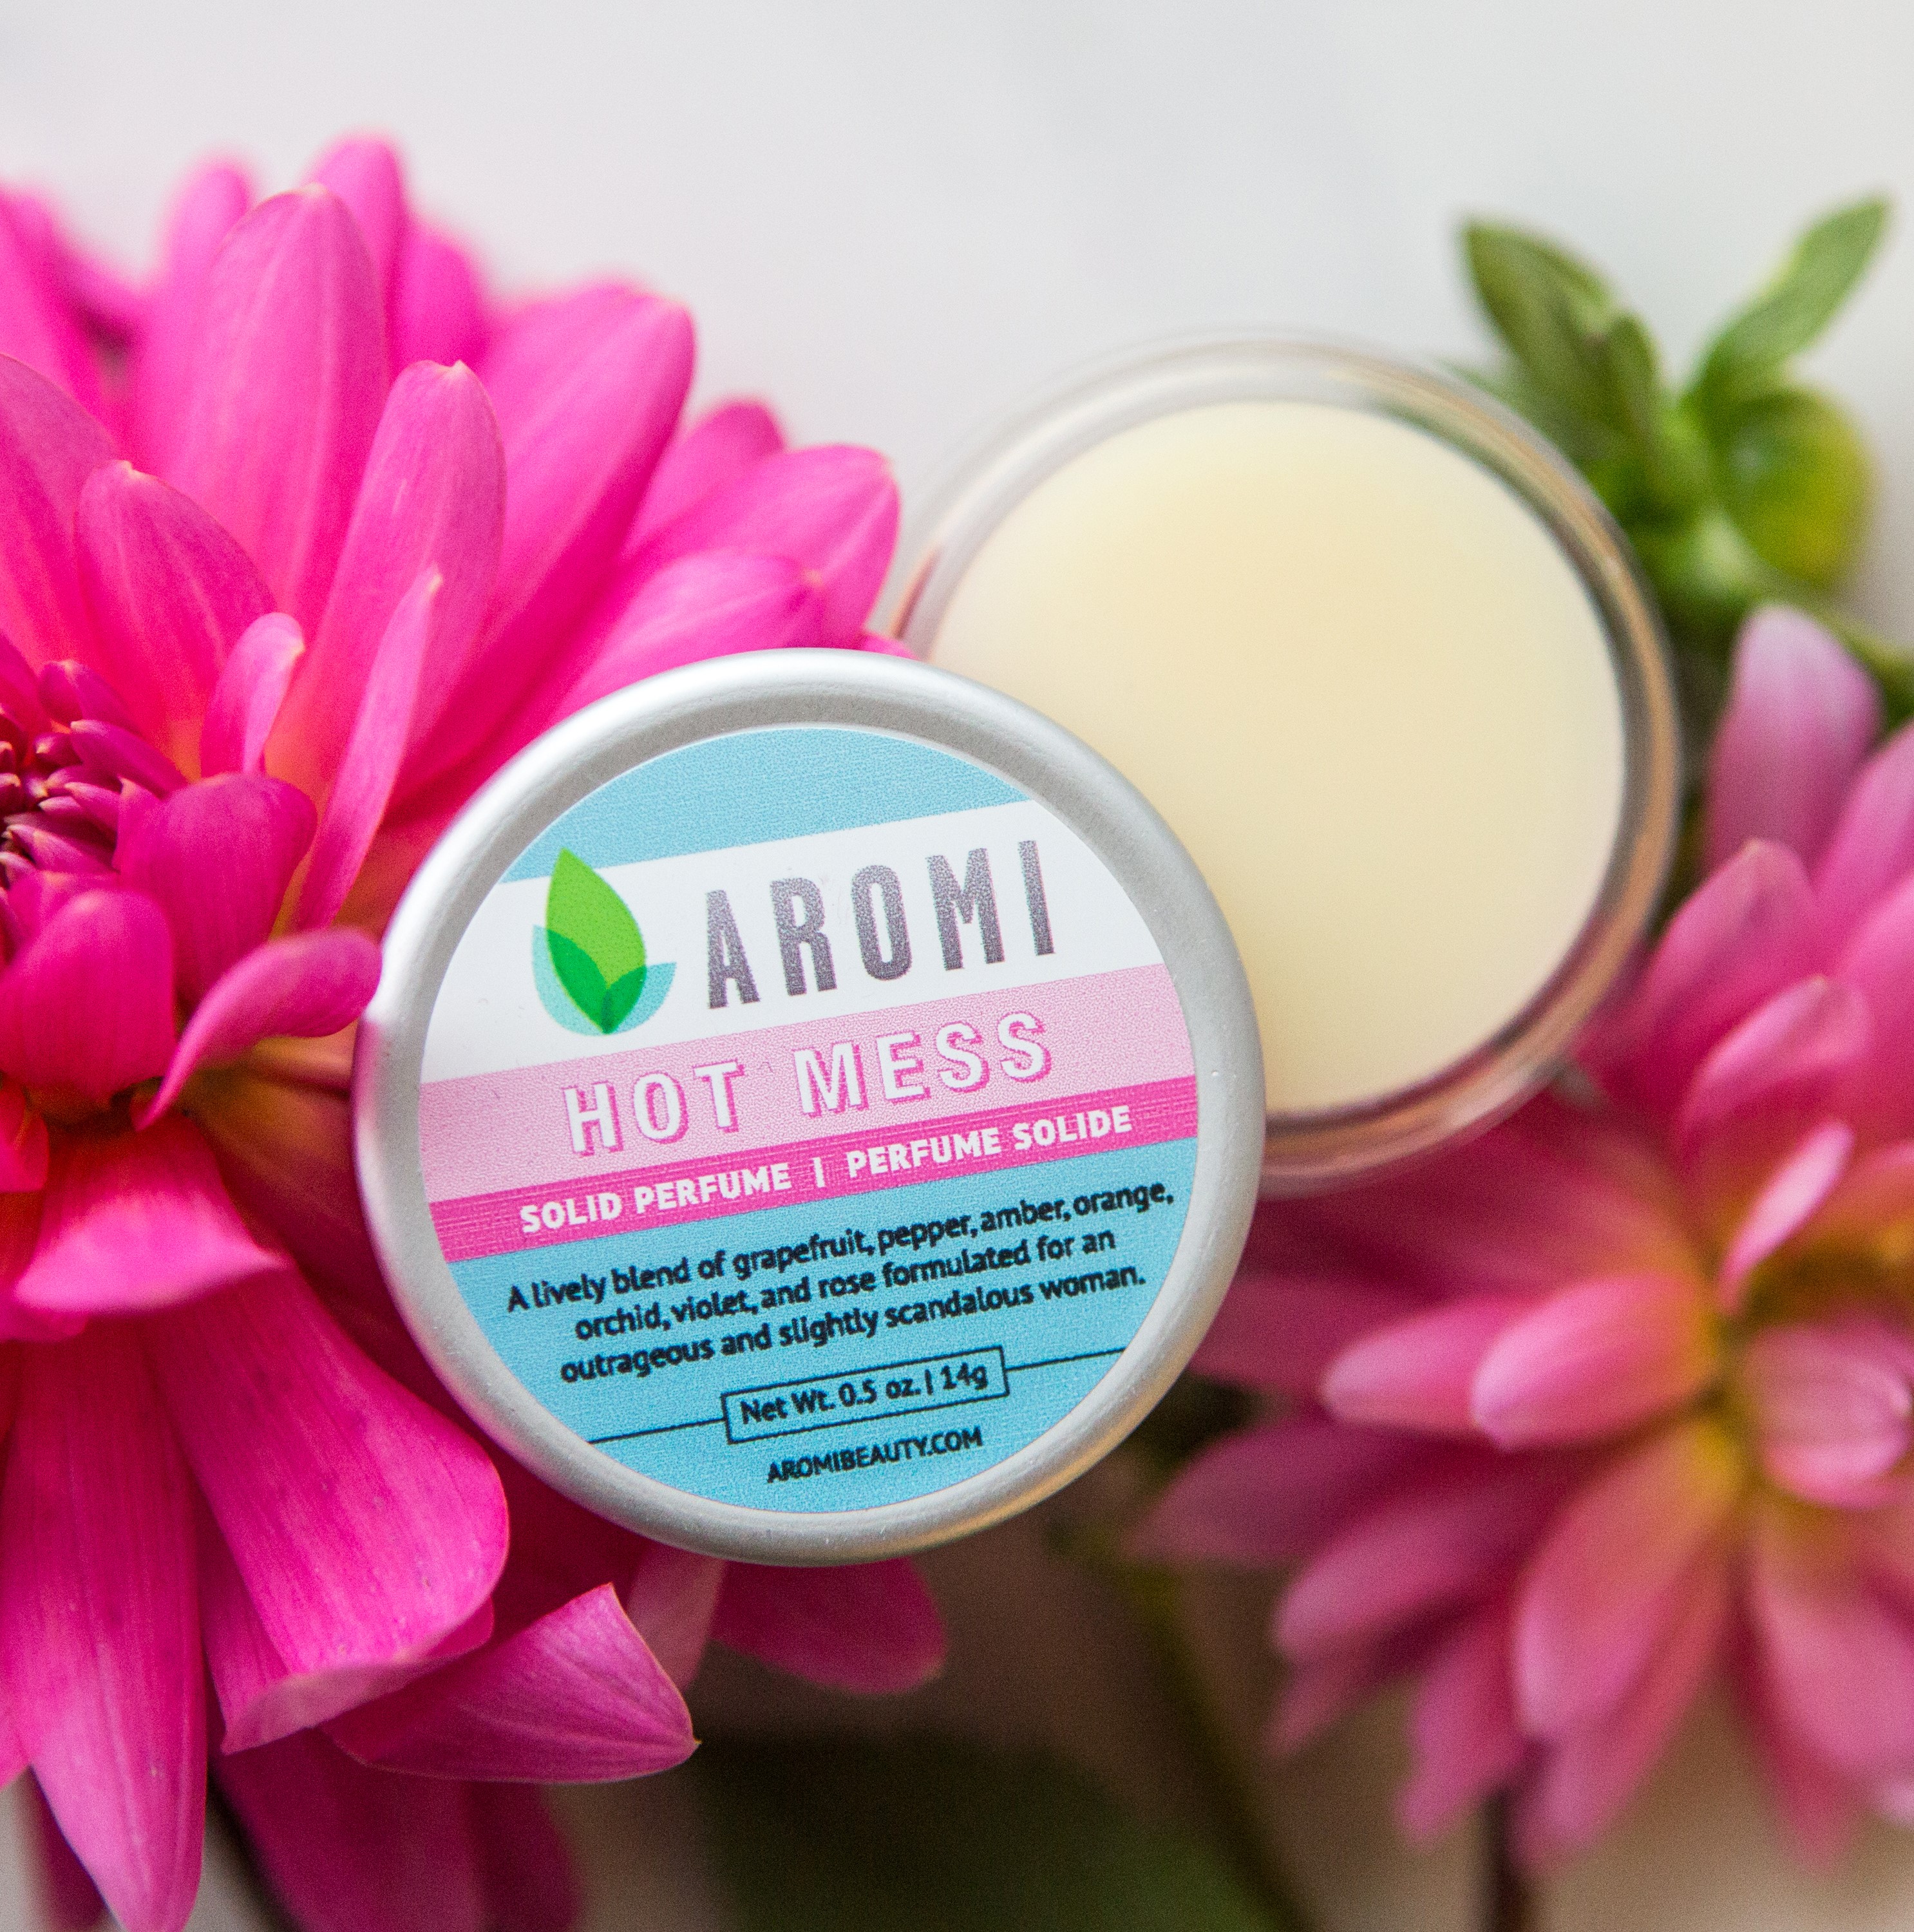 Aromi Hot Mess Solid Perfume